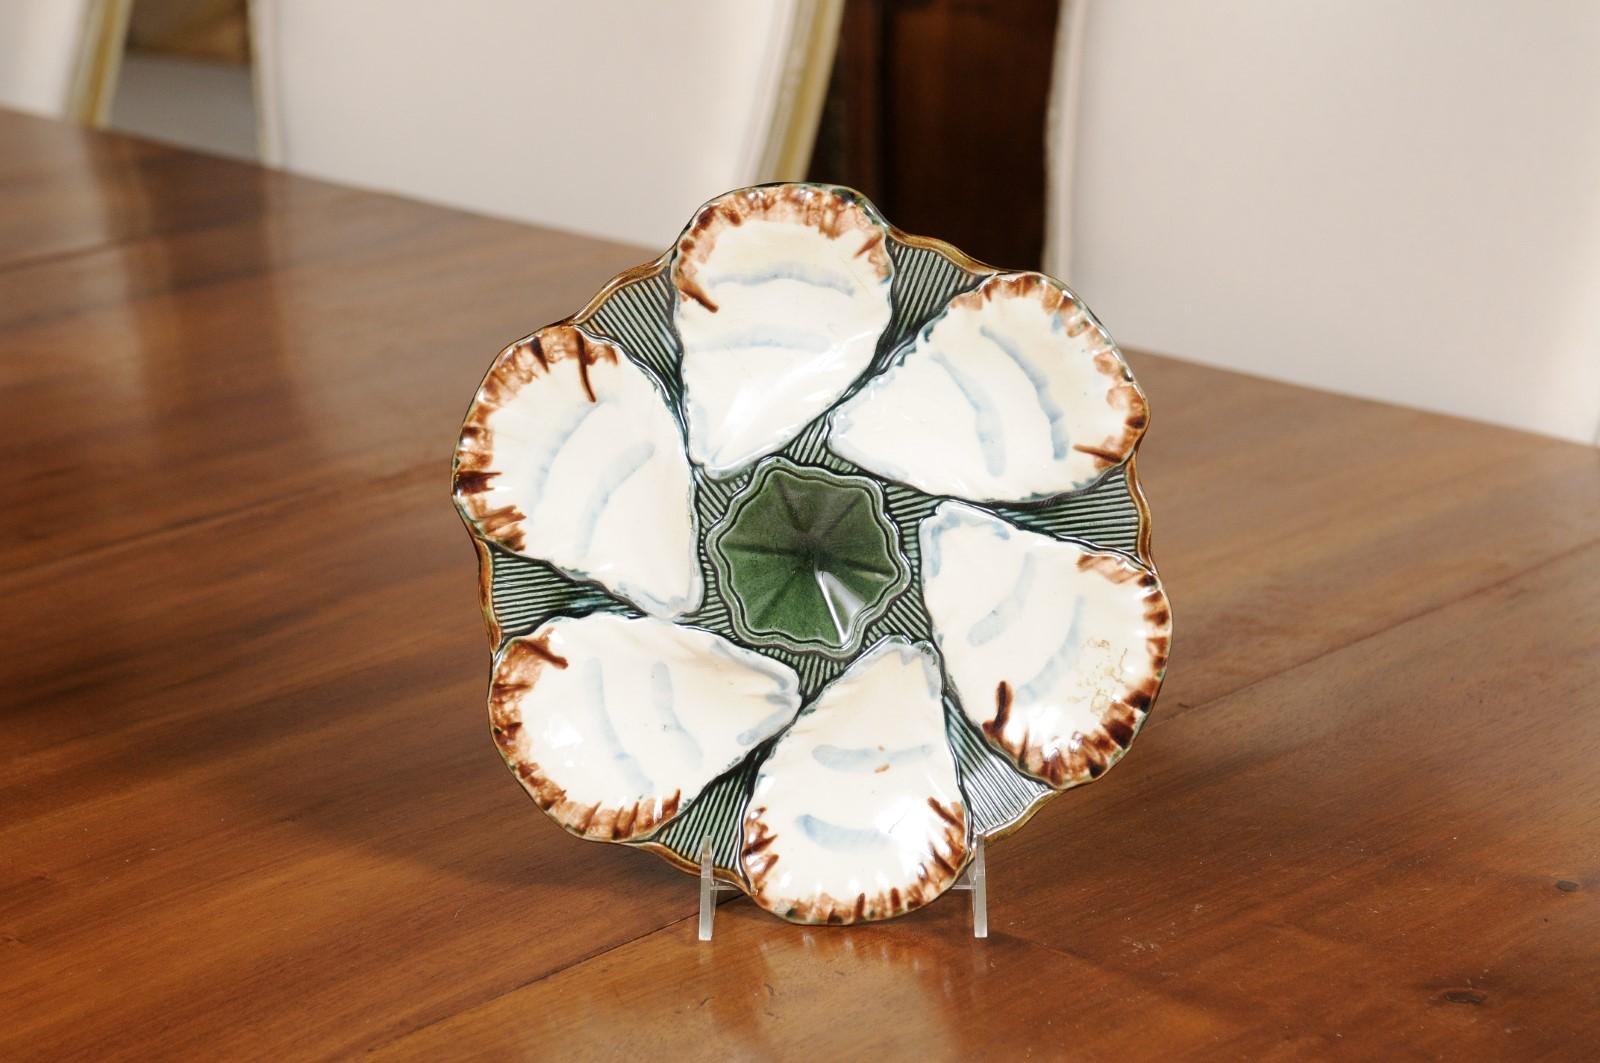 A French glazed Majolica Longchamp Terre de Fer oyster plate from the late 19th century, with central flower. We have two available, priced and sold $295 each. Created in France during the last decade of the 19th century, this oyster plate features